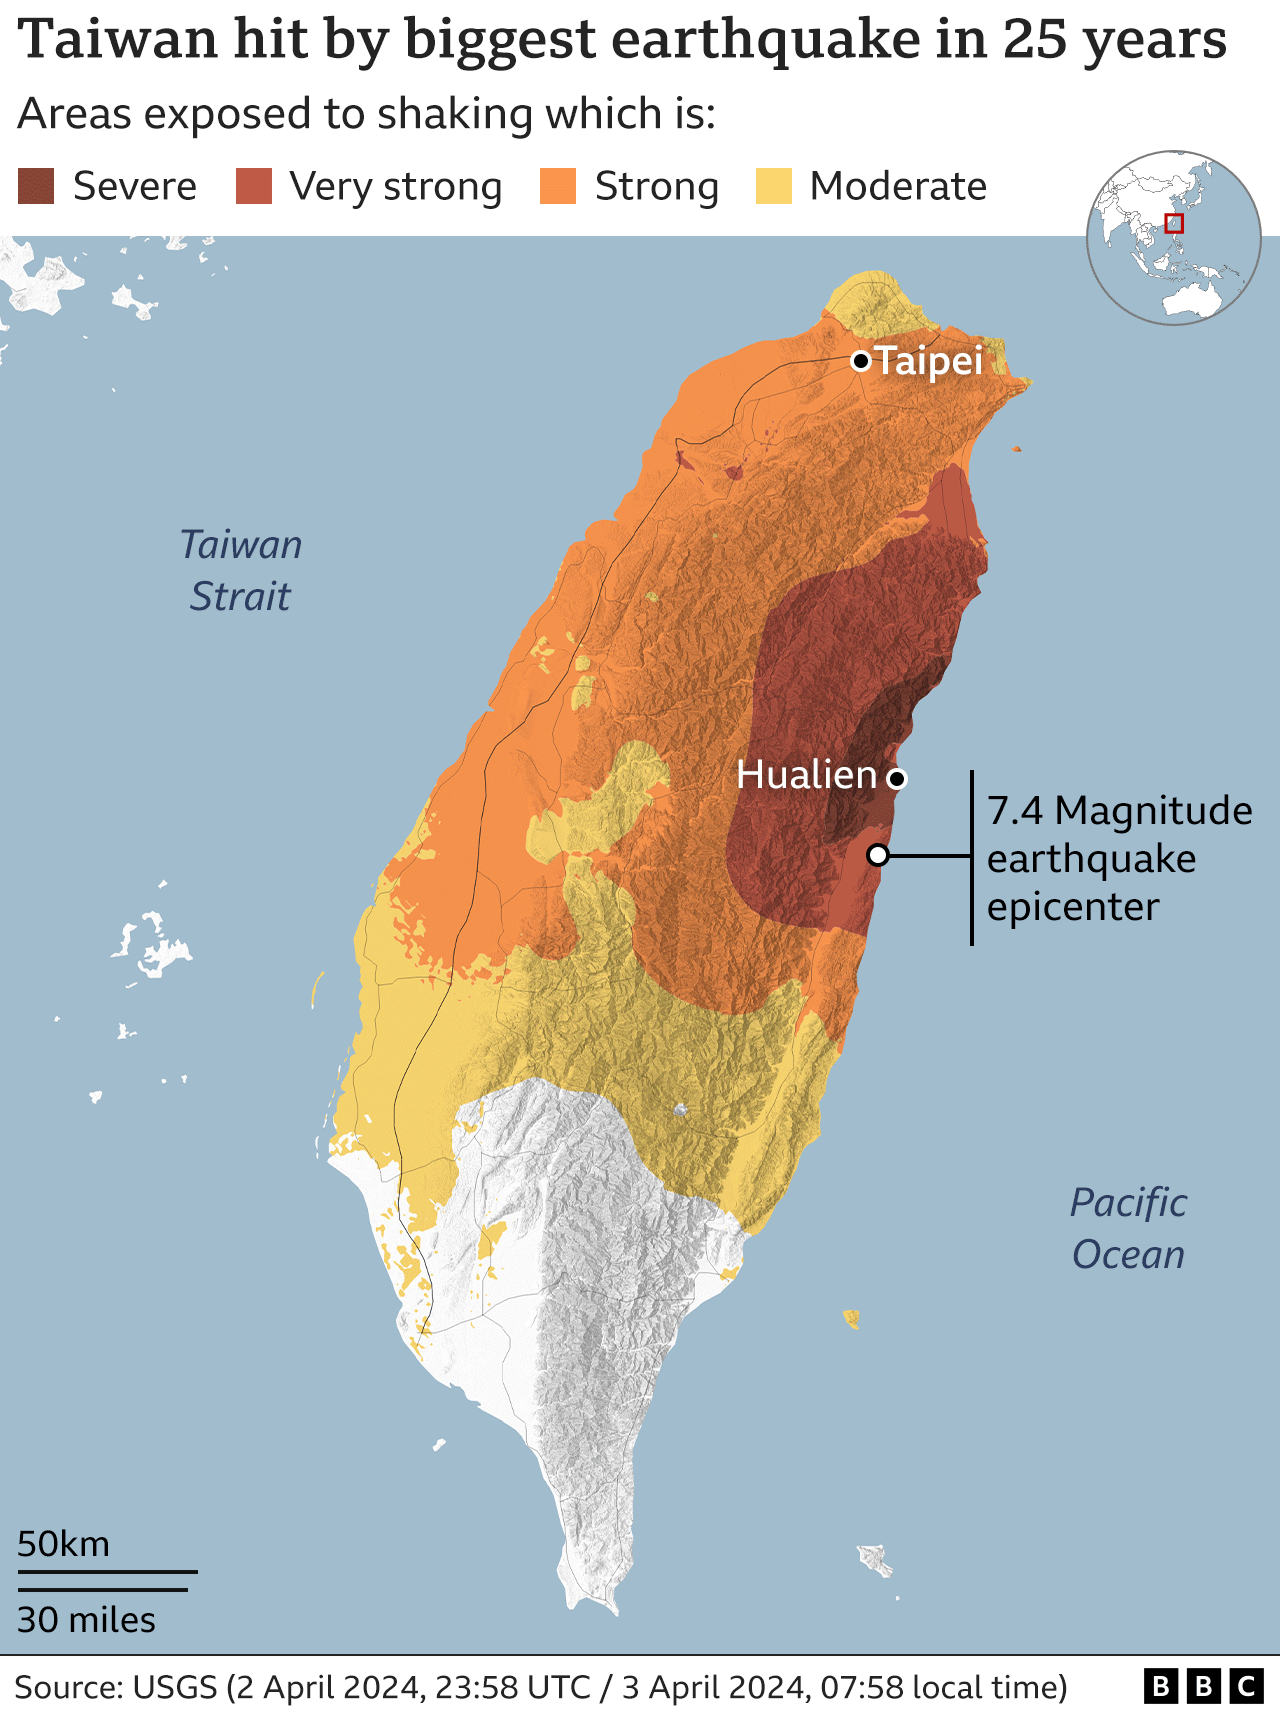 Map of Taiwan showing areas hit most severely by earthquake